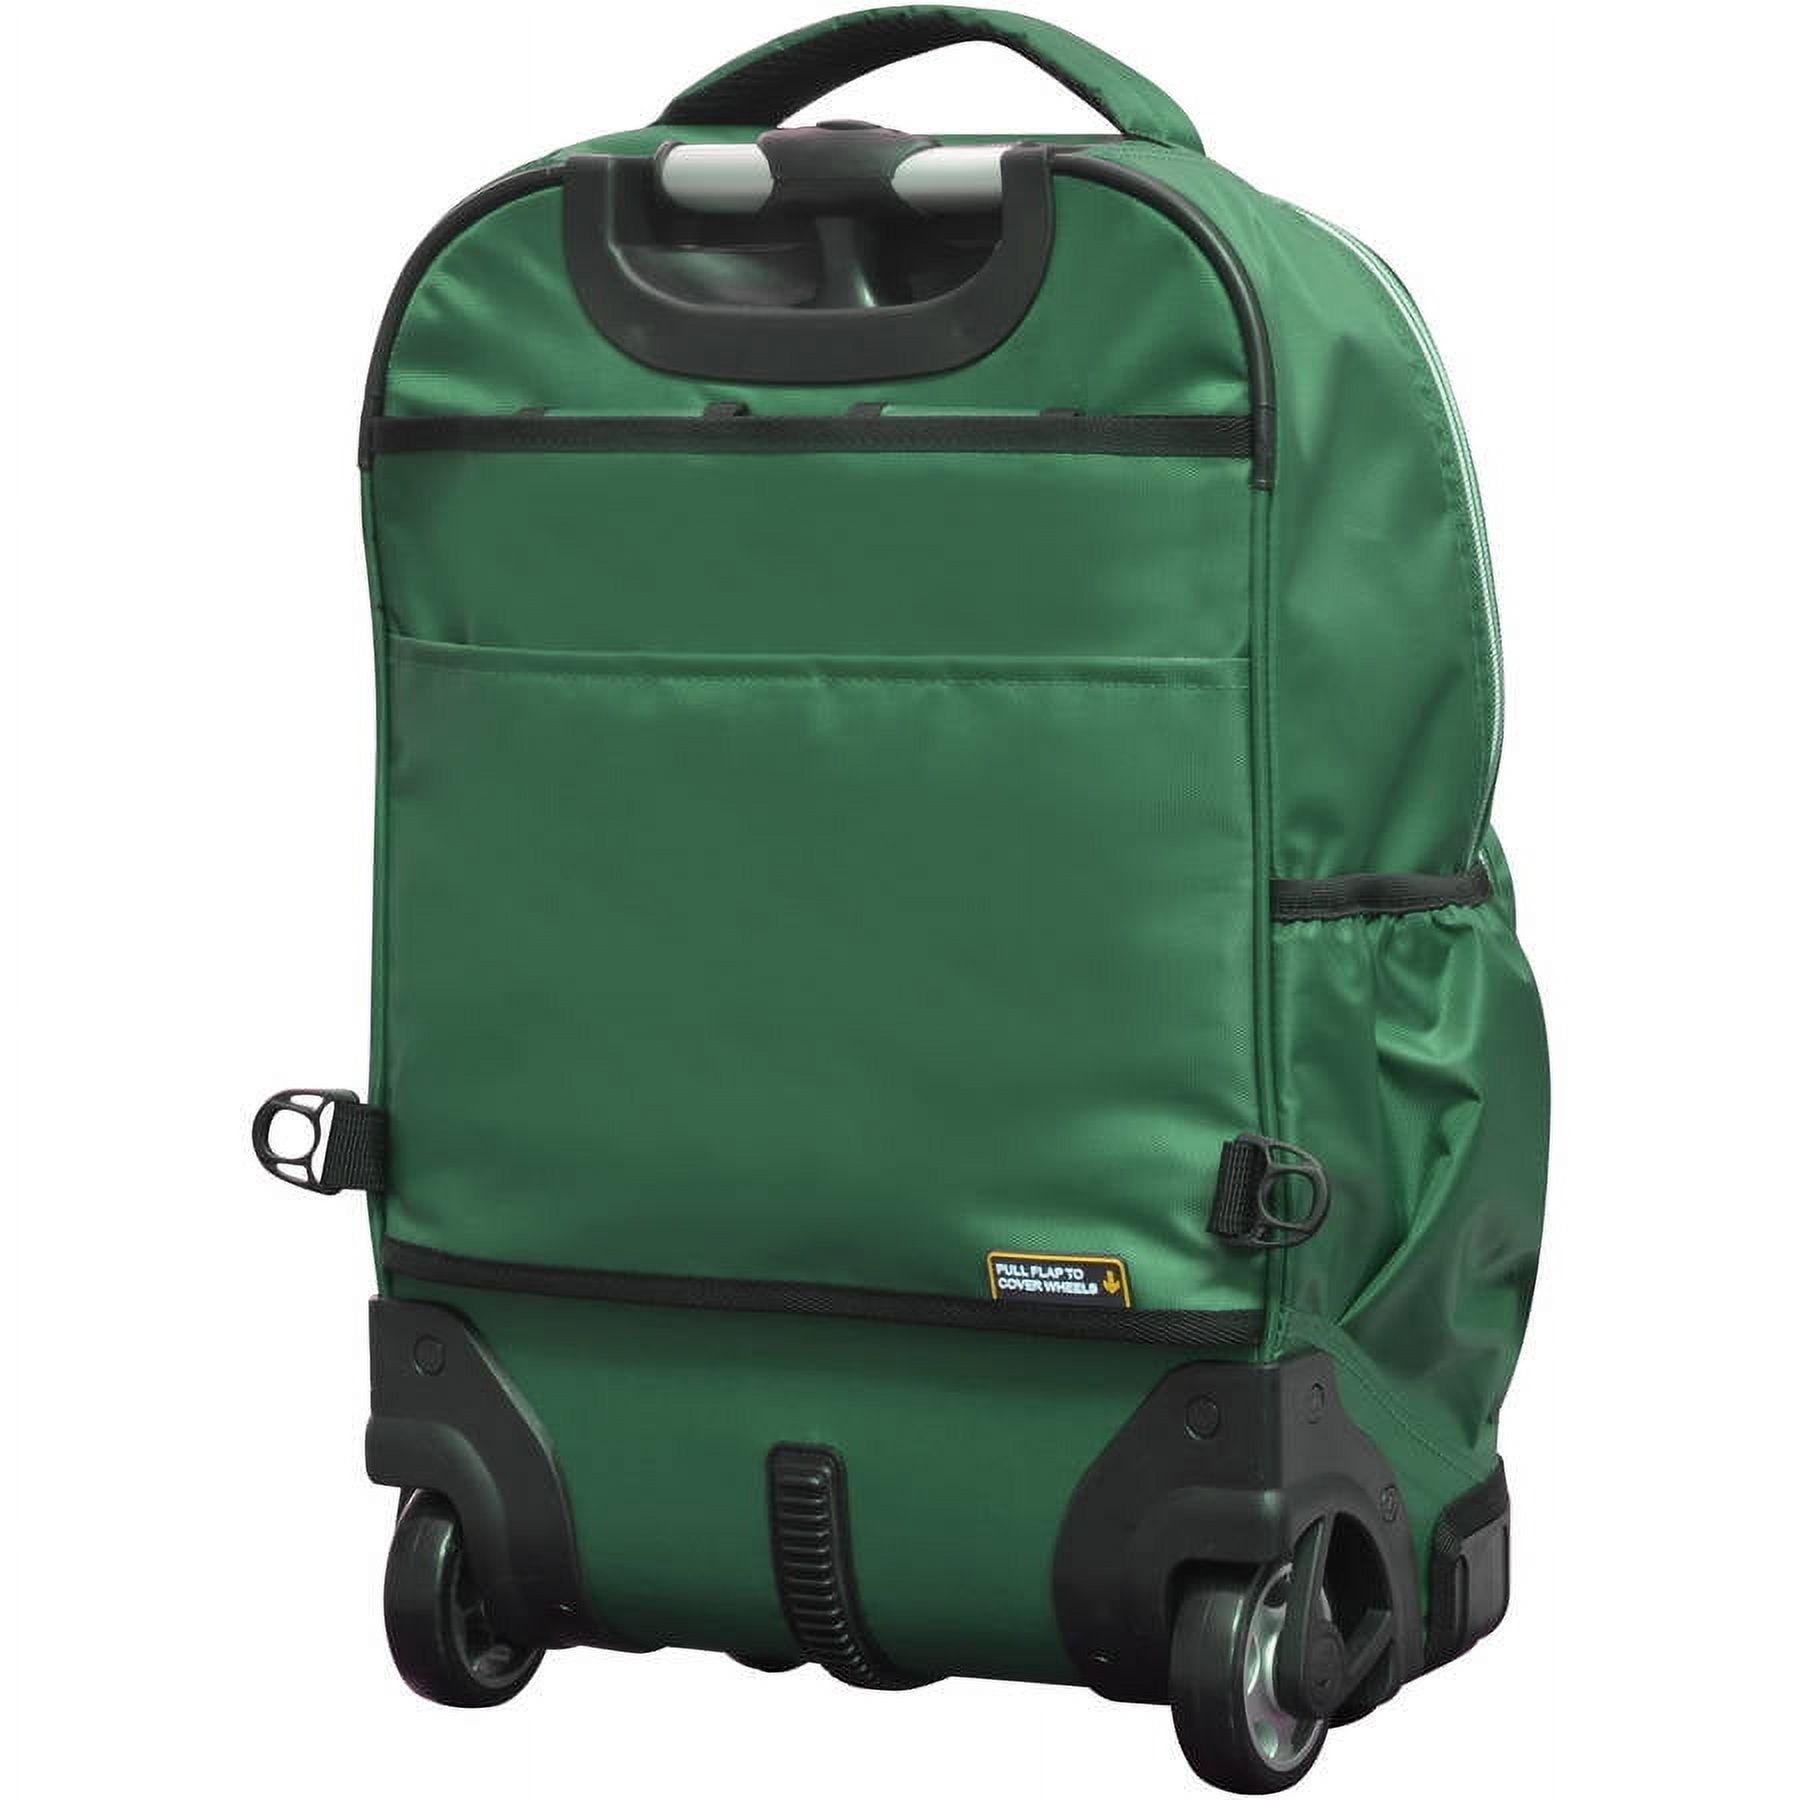 Melody 19 Rolling Backpack - image 3 of 10